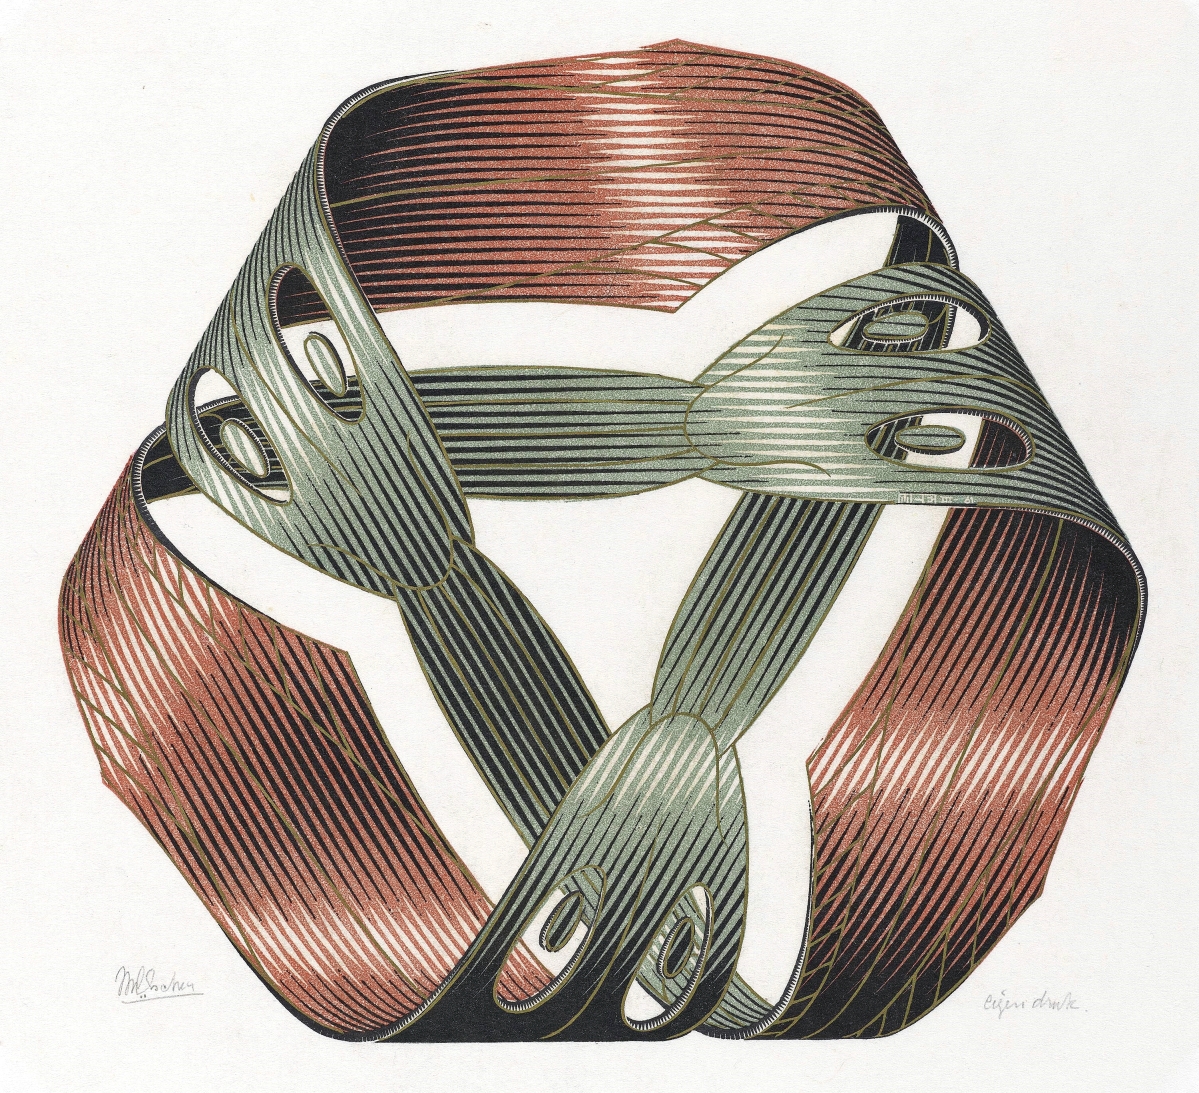 “Möbius Strip I” M.C. Escher, March 1961. Wood engraving and woodcut in red, green, gold, and black, printed from two blocks, on paper. Courtesy of Michael S. Sachs. All M.C. Escher works ©The M.C. Escher Company, The Netherlands. All rights reserved.